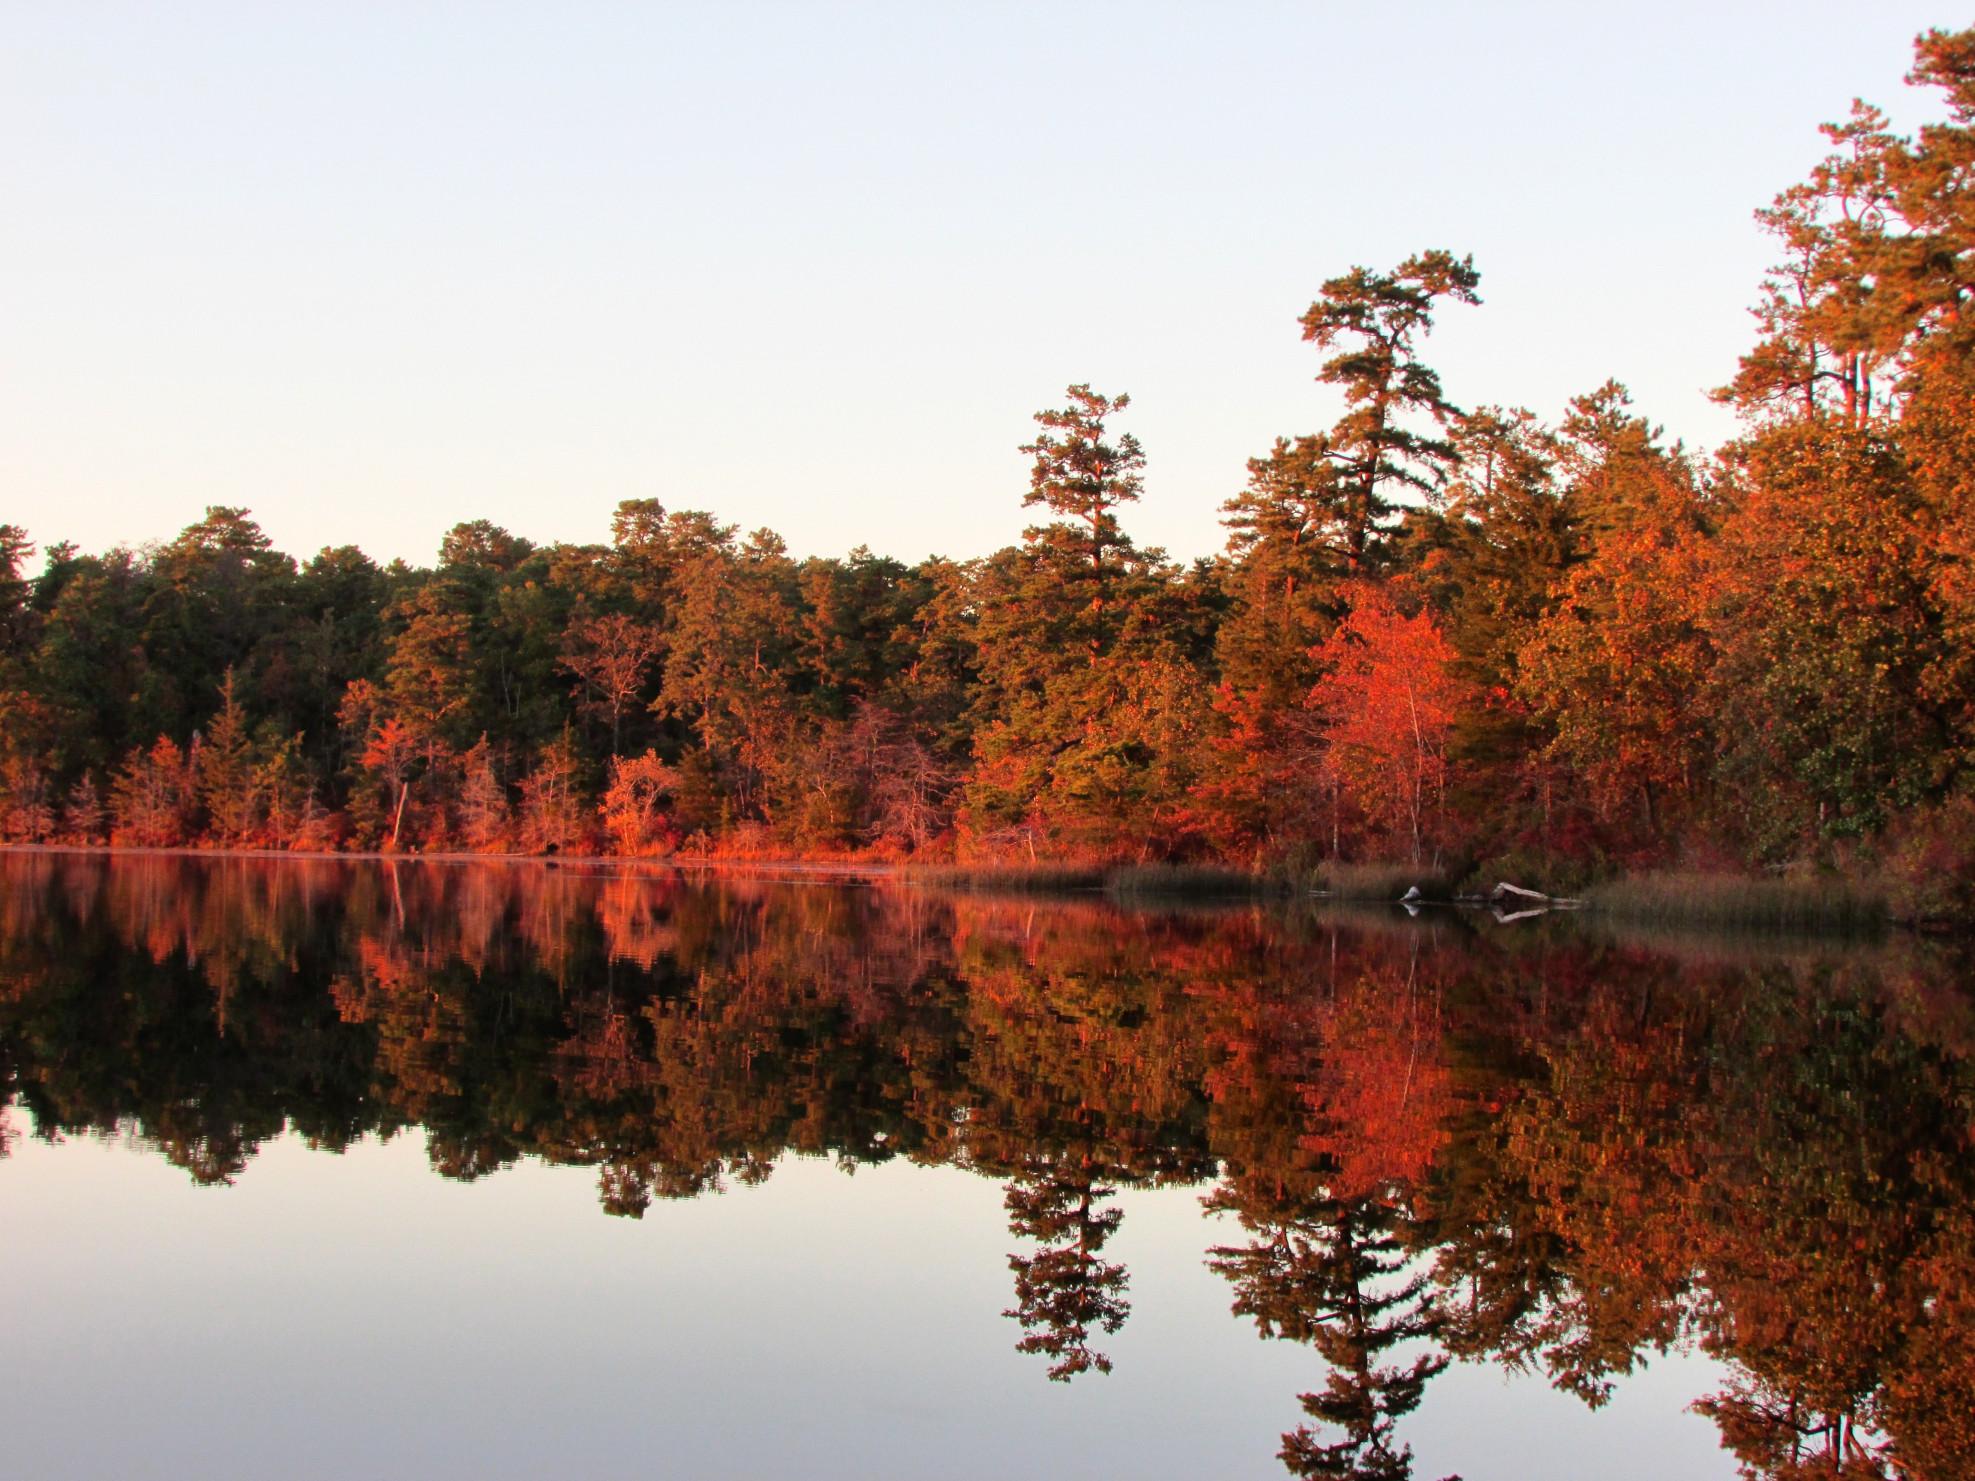 View of a lake surrounded by red and brown trees, reflected in the lake. 